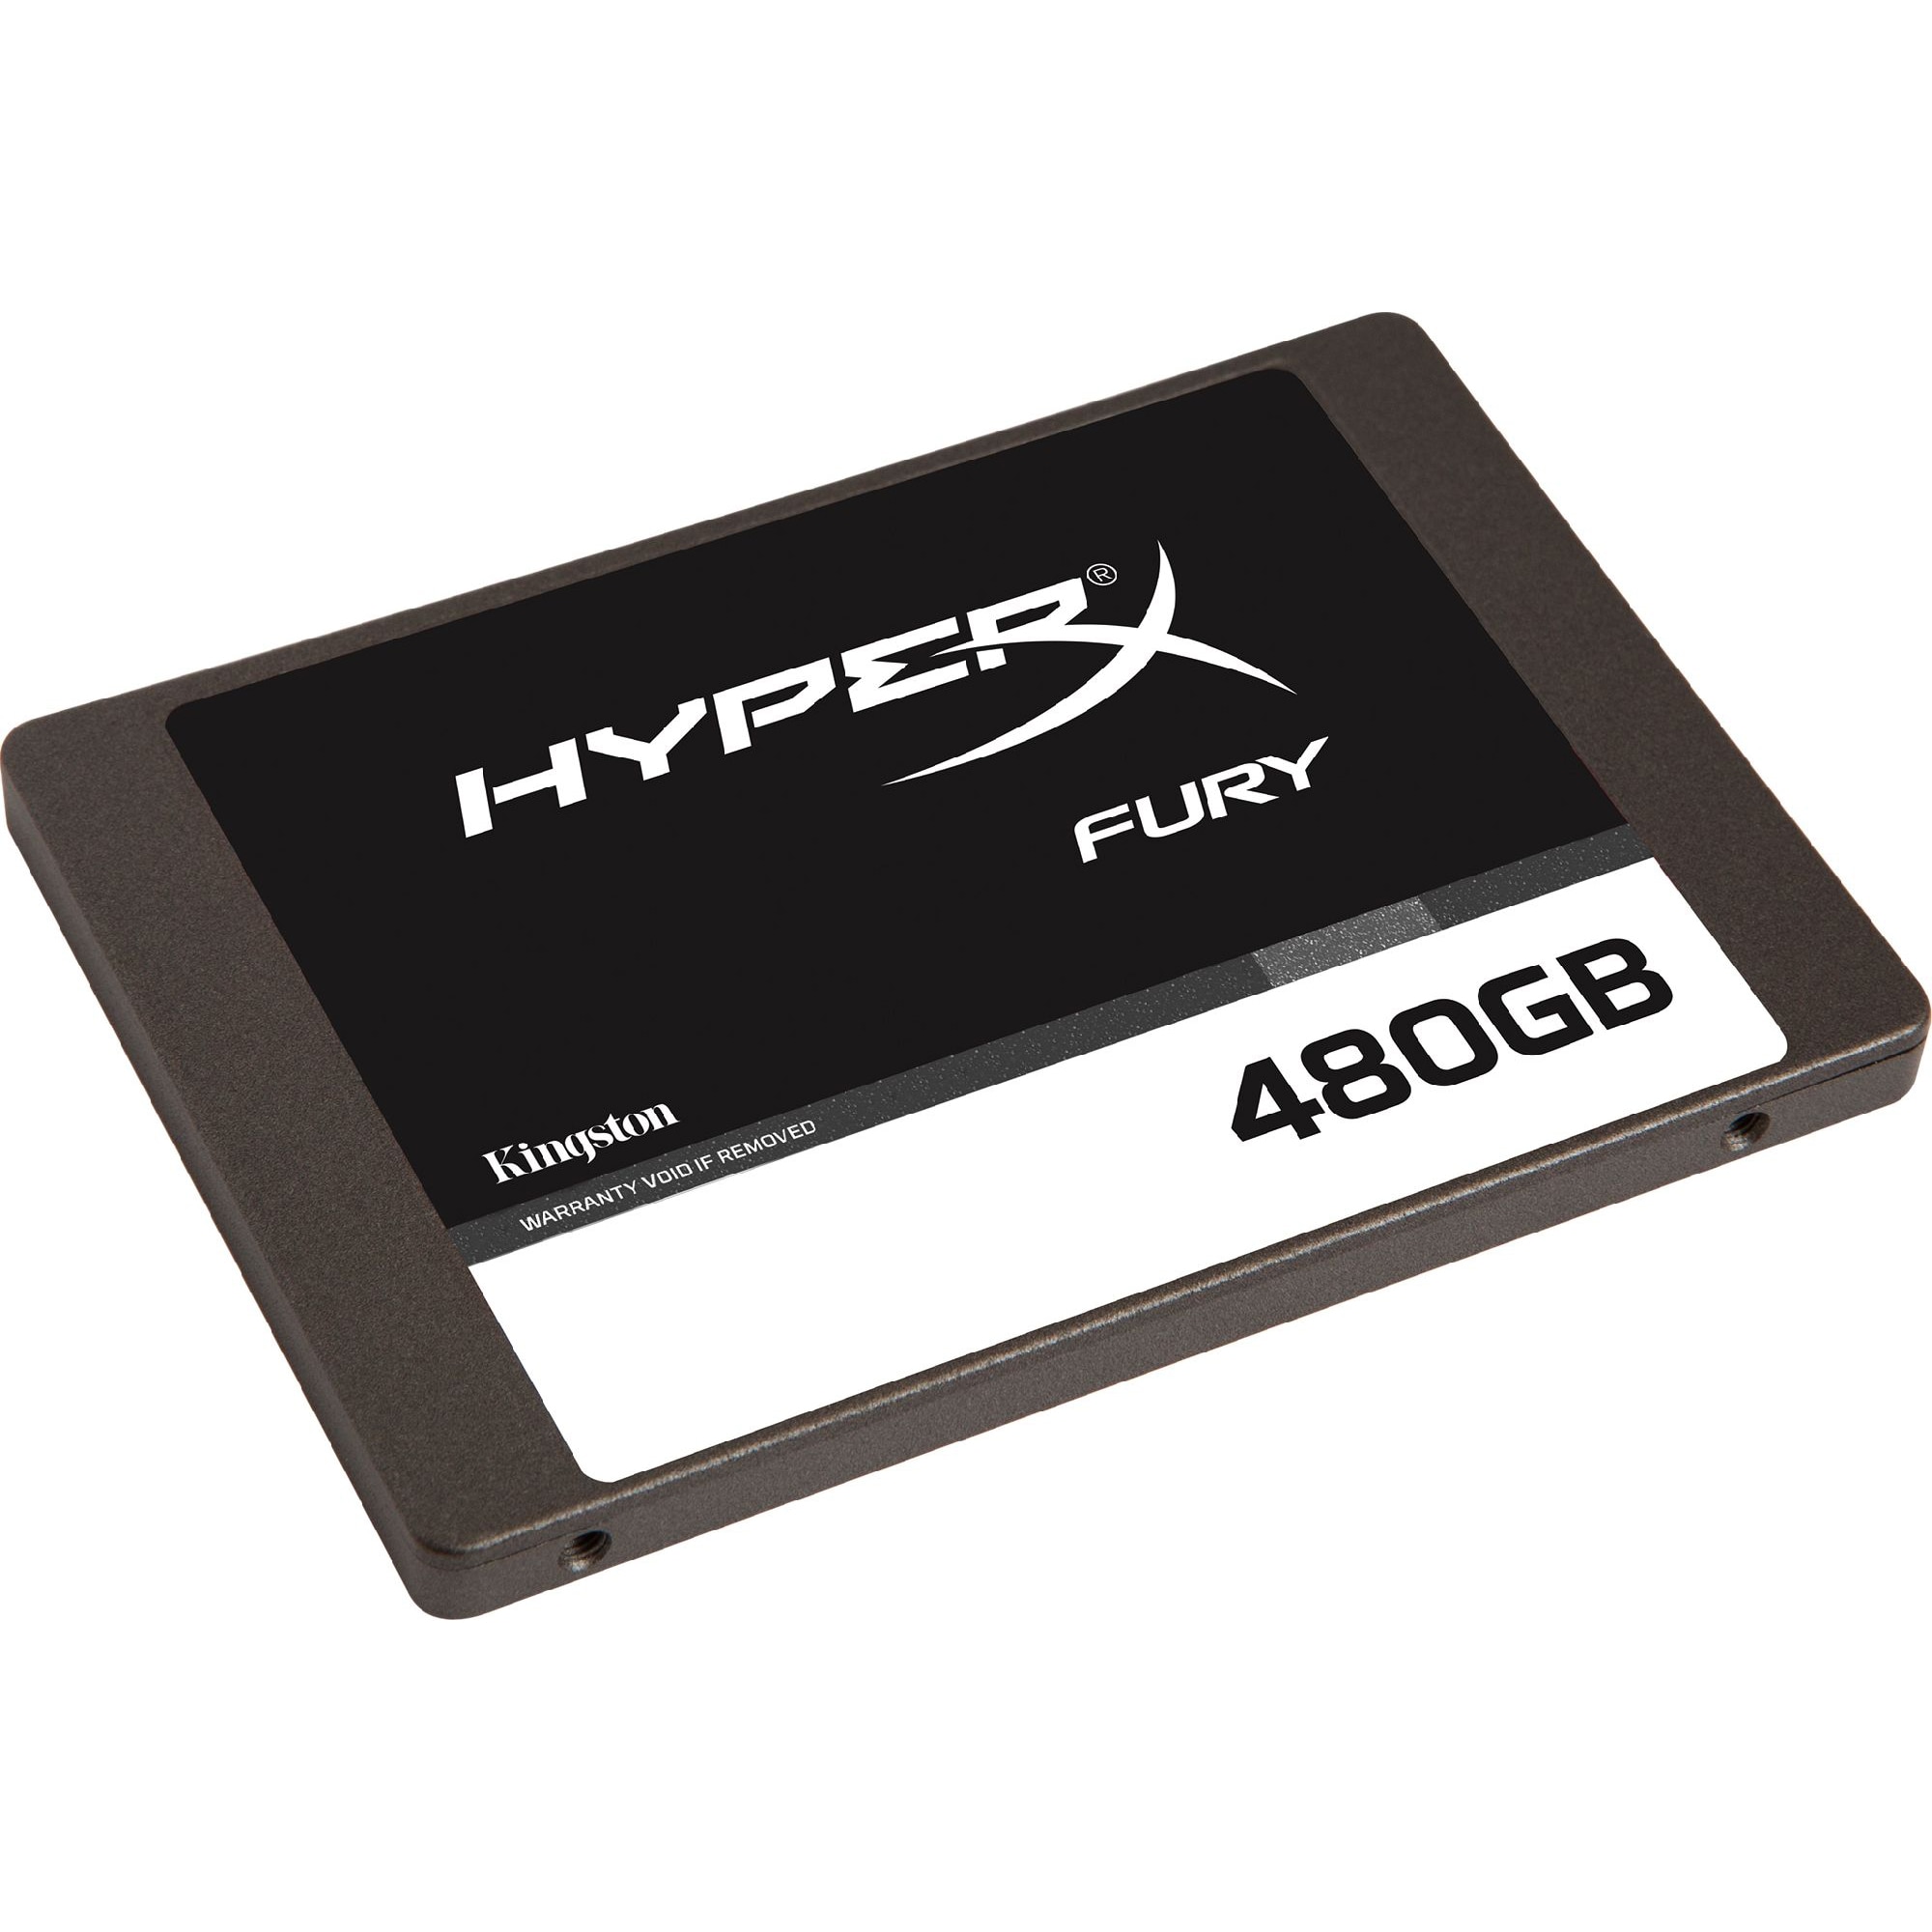 Deviation naked professional Solid State Drive (SSD) HyperX FURY, 480GB, 2.5", SATA III - eMAG.ro